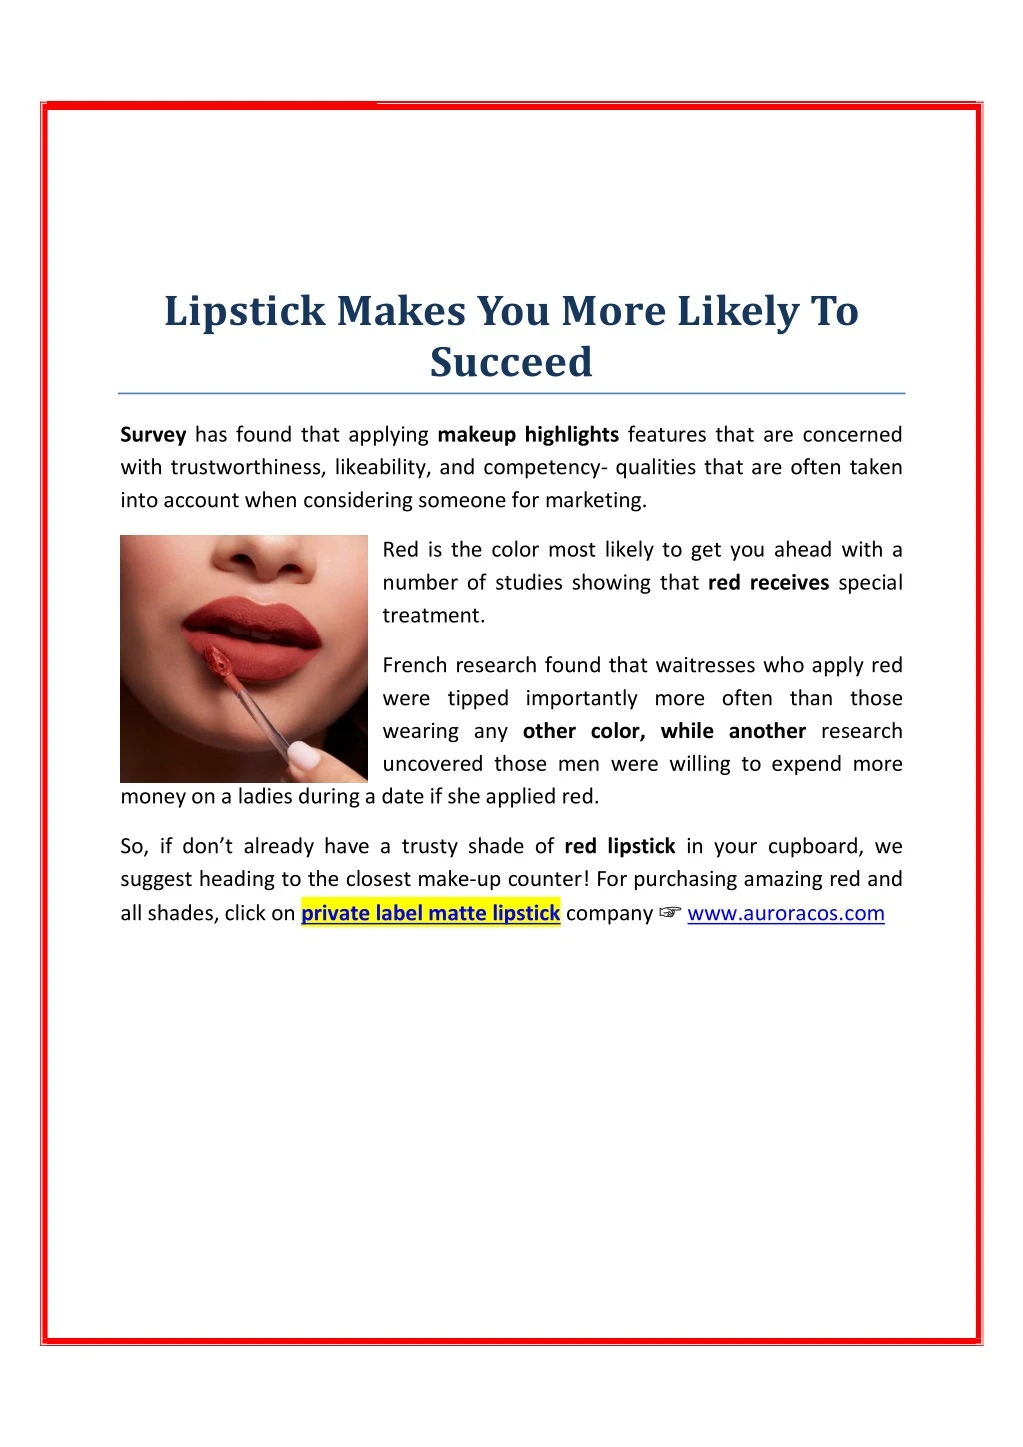 lipstick makes you more likely to succeed